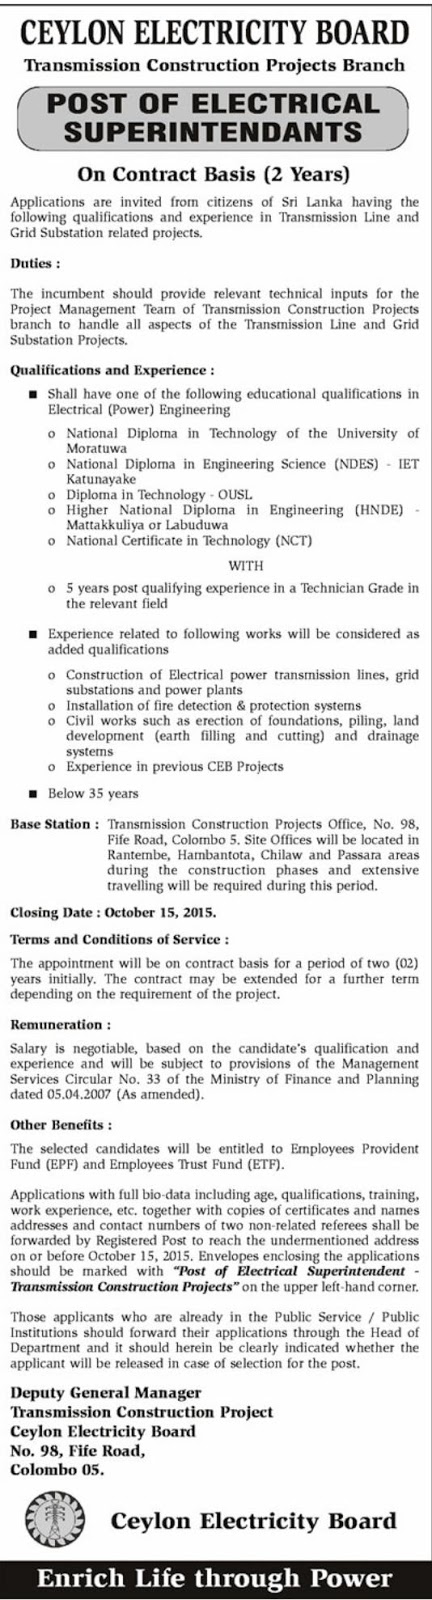 Electrical Superintendents Vacancy in Ceylon Electricity Board